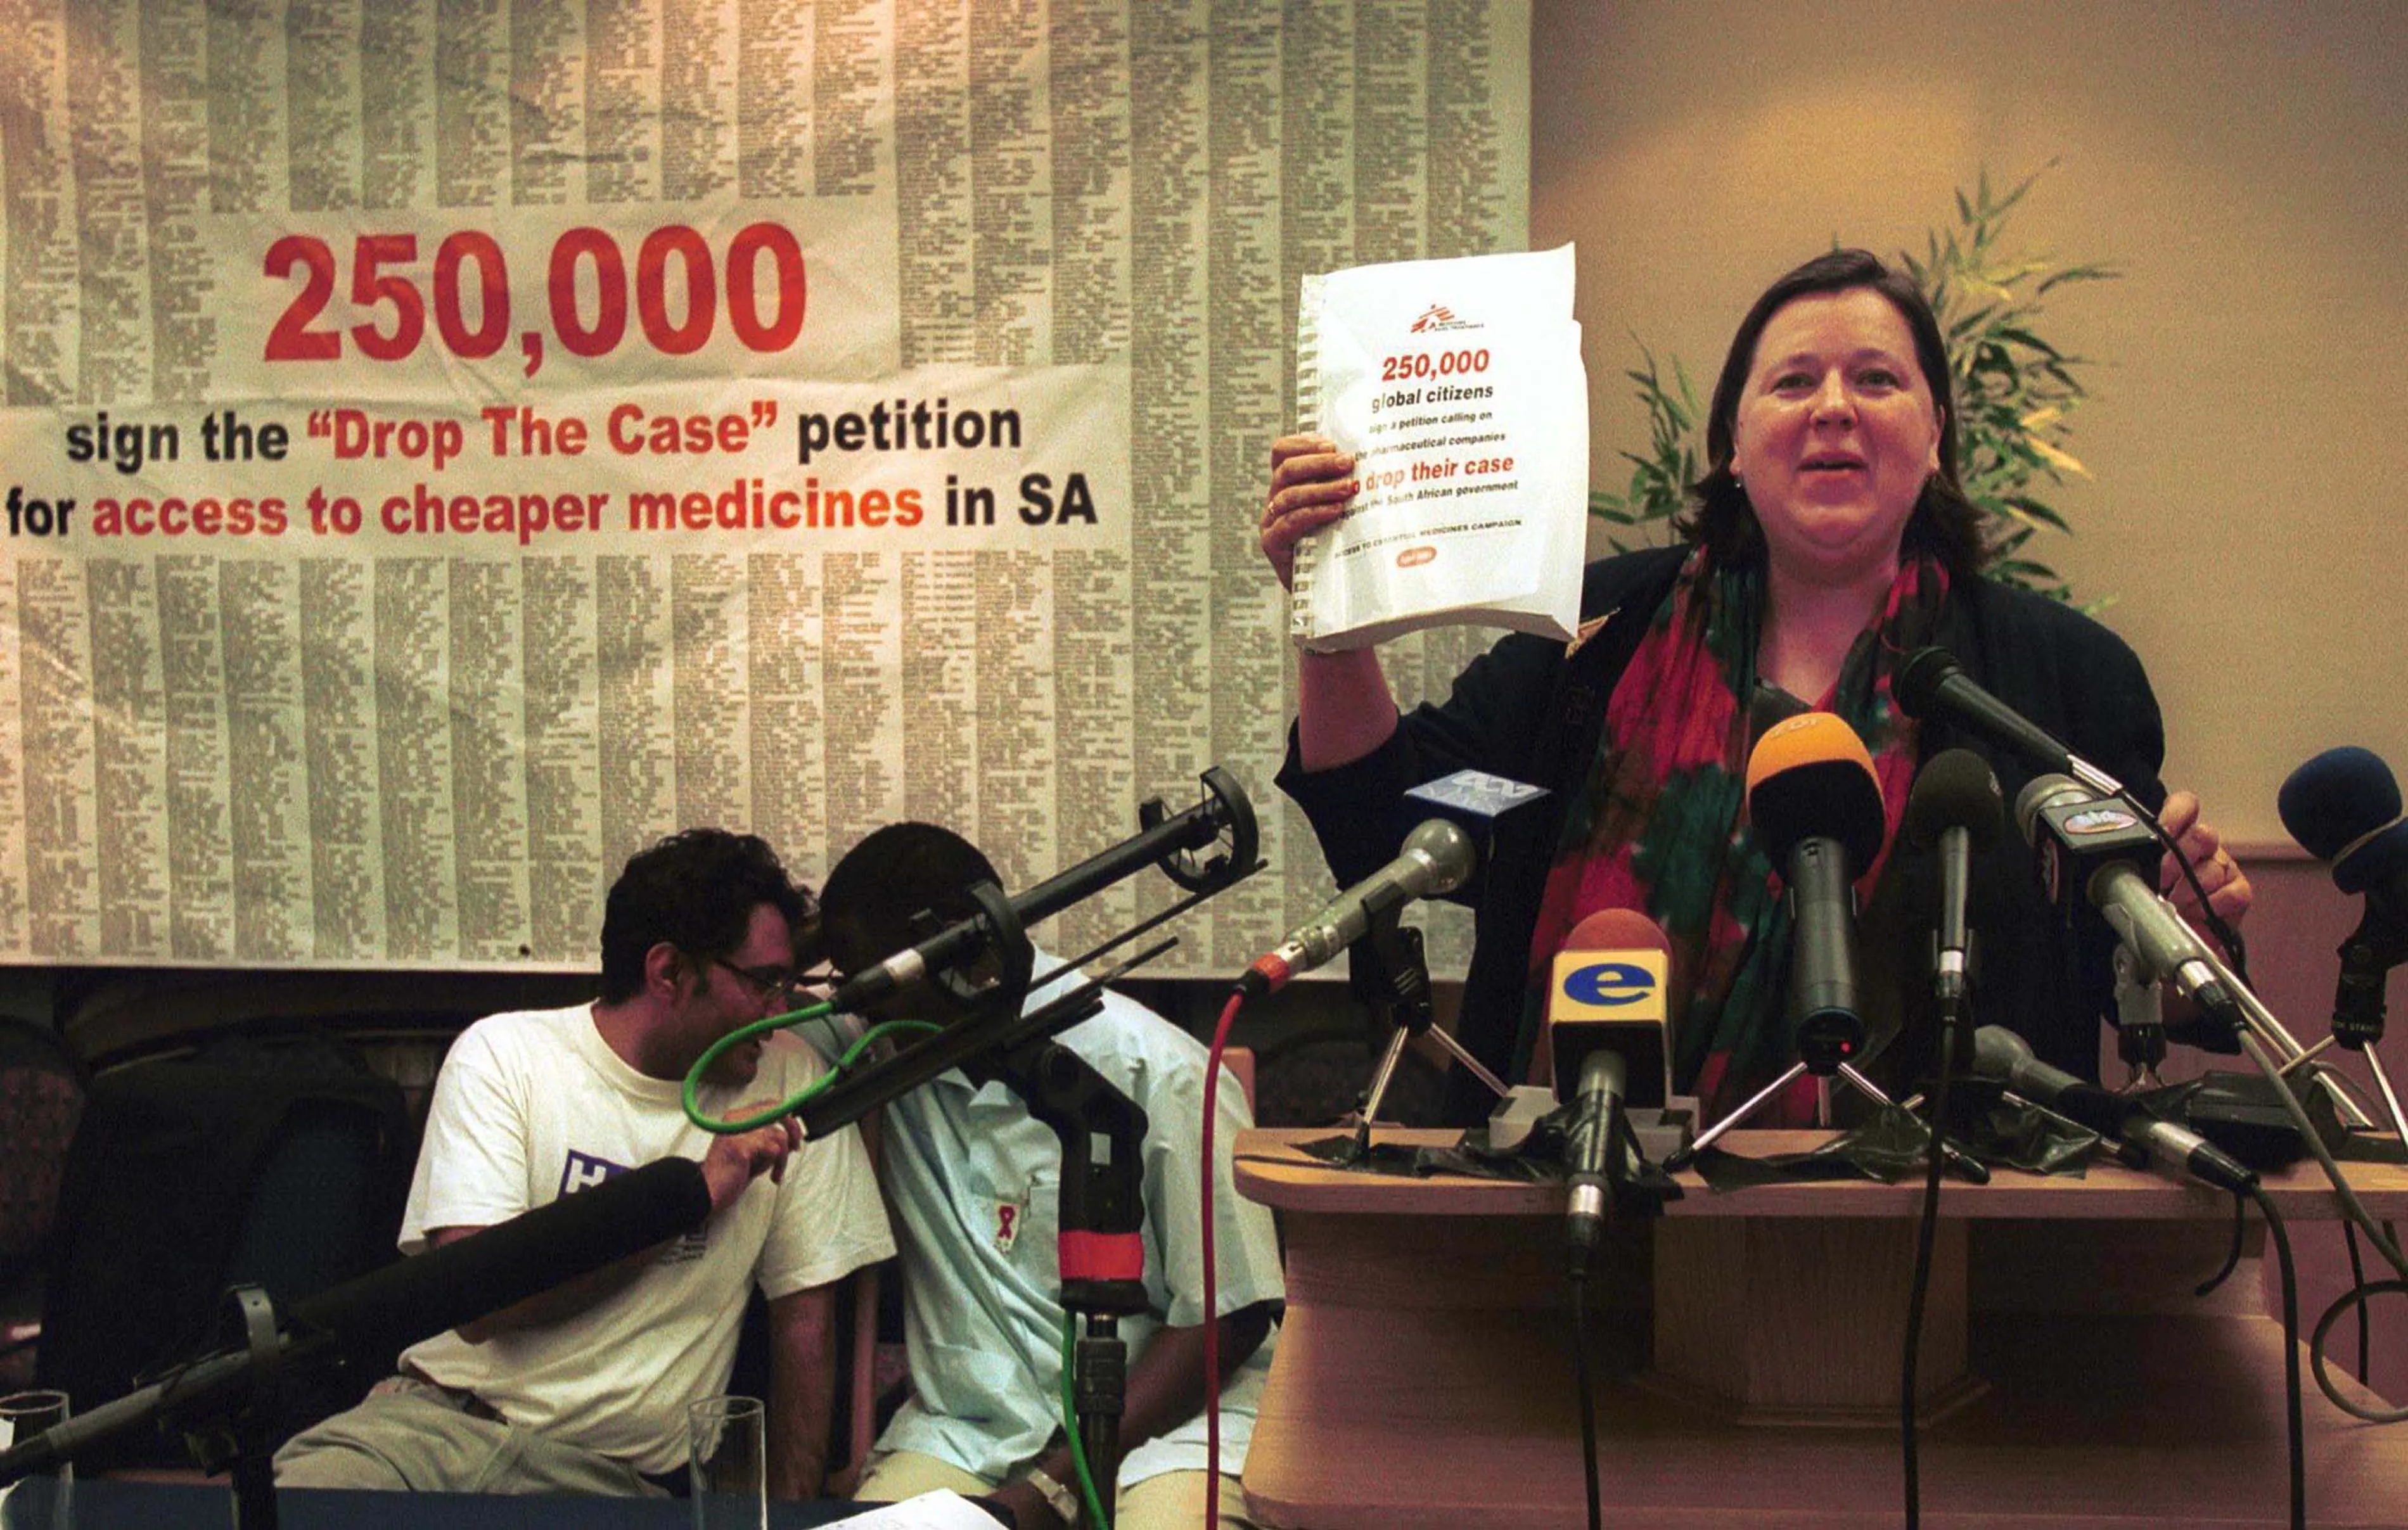 Ellen 't Hoen of MSF spoke at a press conference held by MSF, Oxfam, Cosatu, and the Treatment Action Campaign in Pretoria.